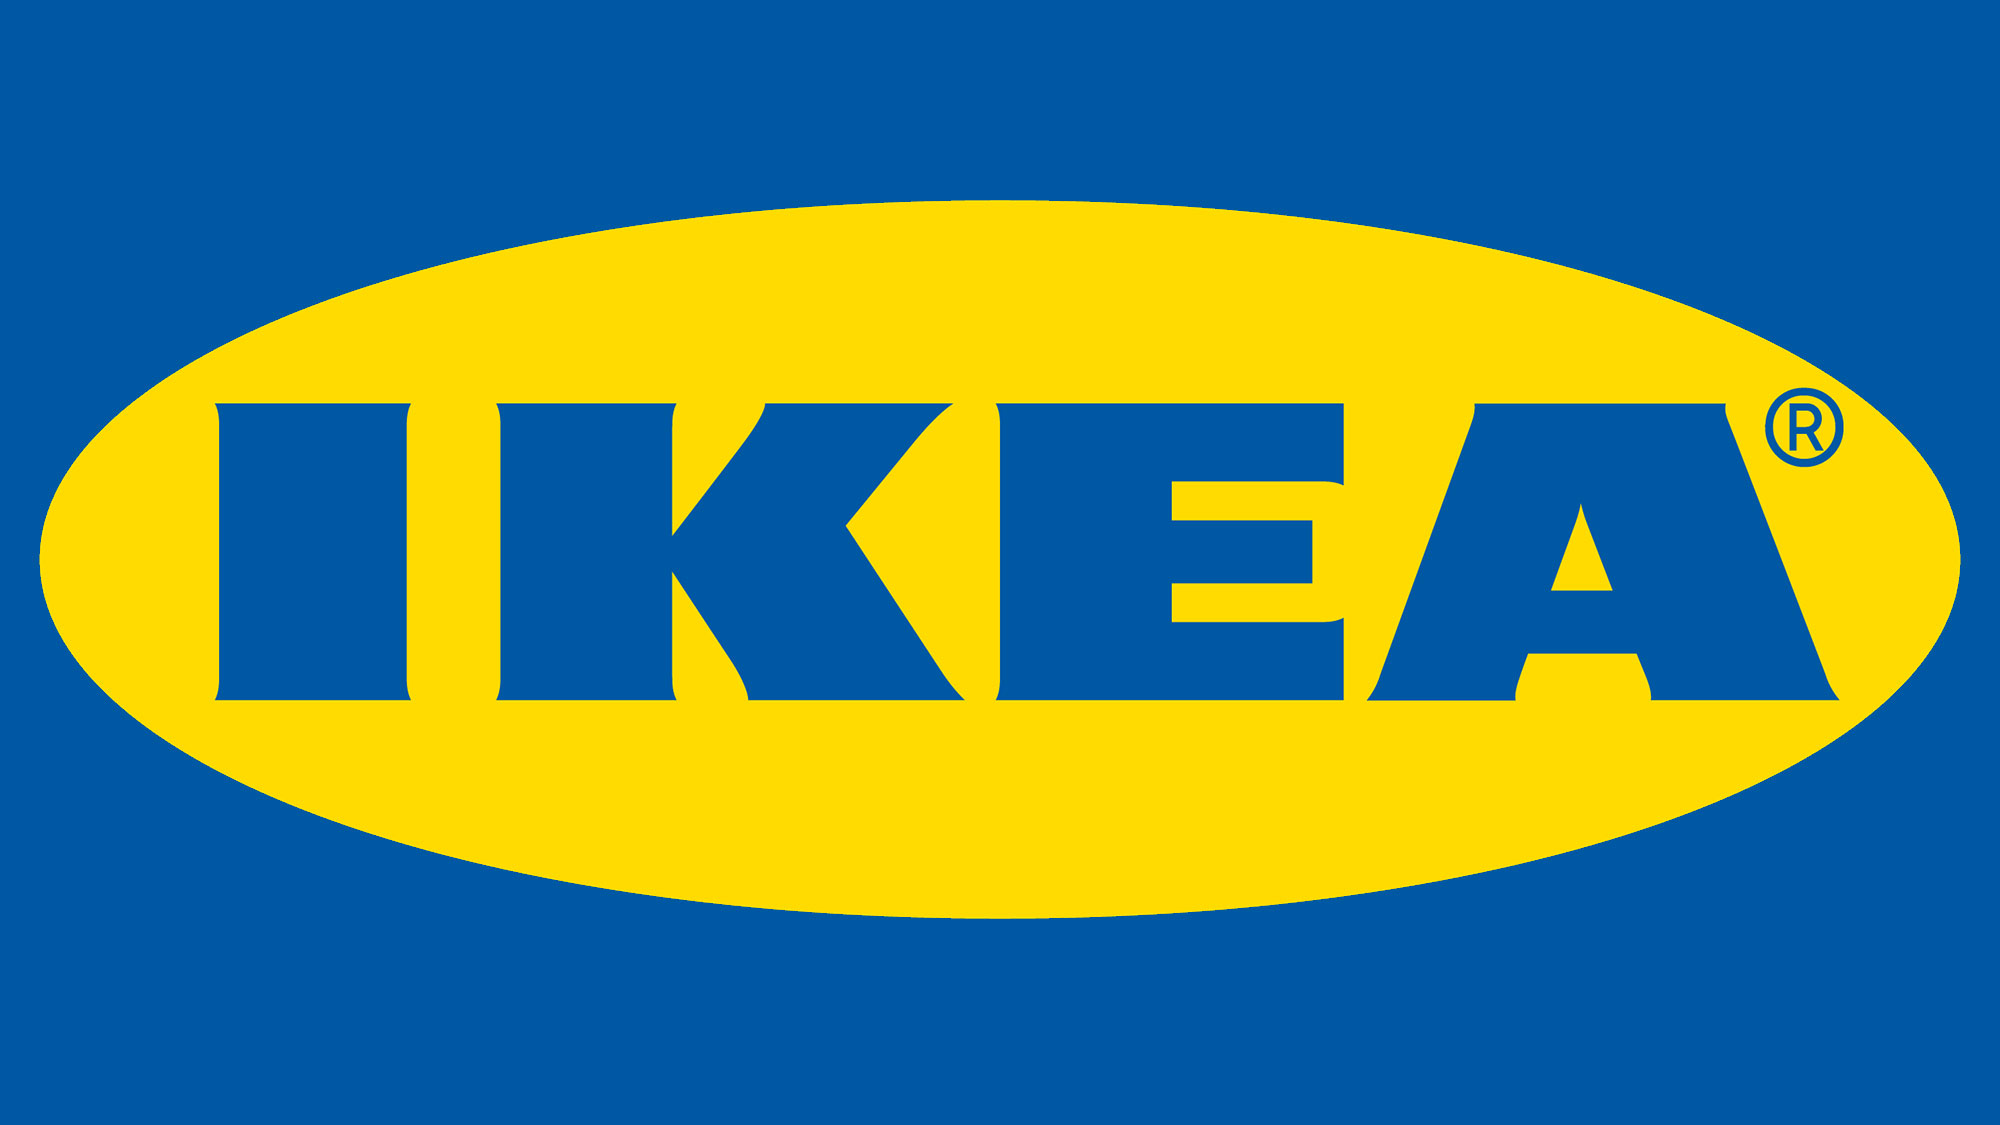 IKEA's new logo is. different